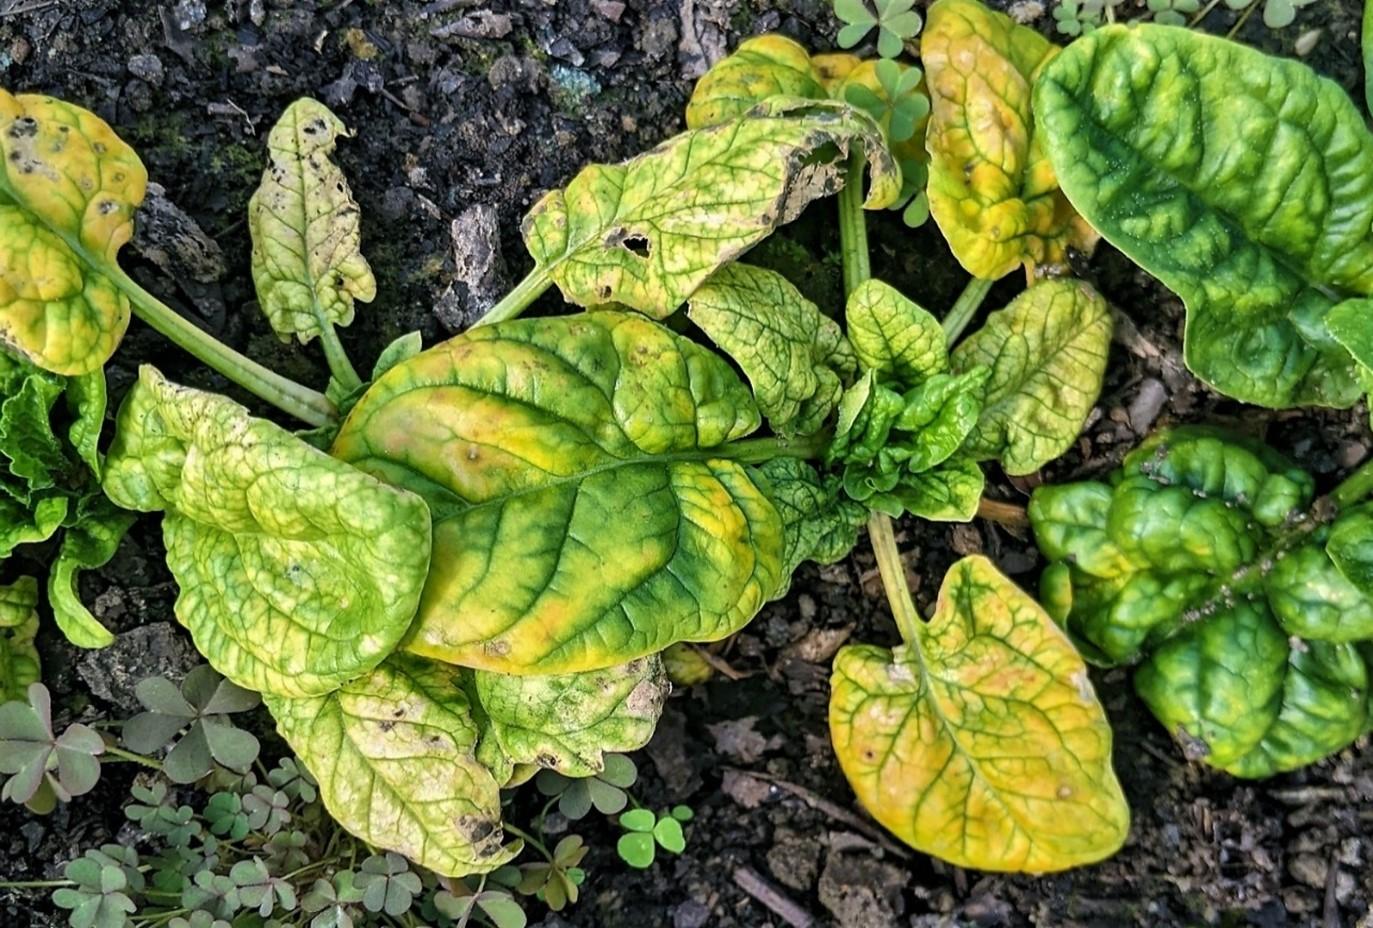 Infected spinach